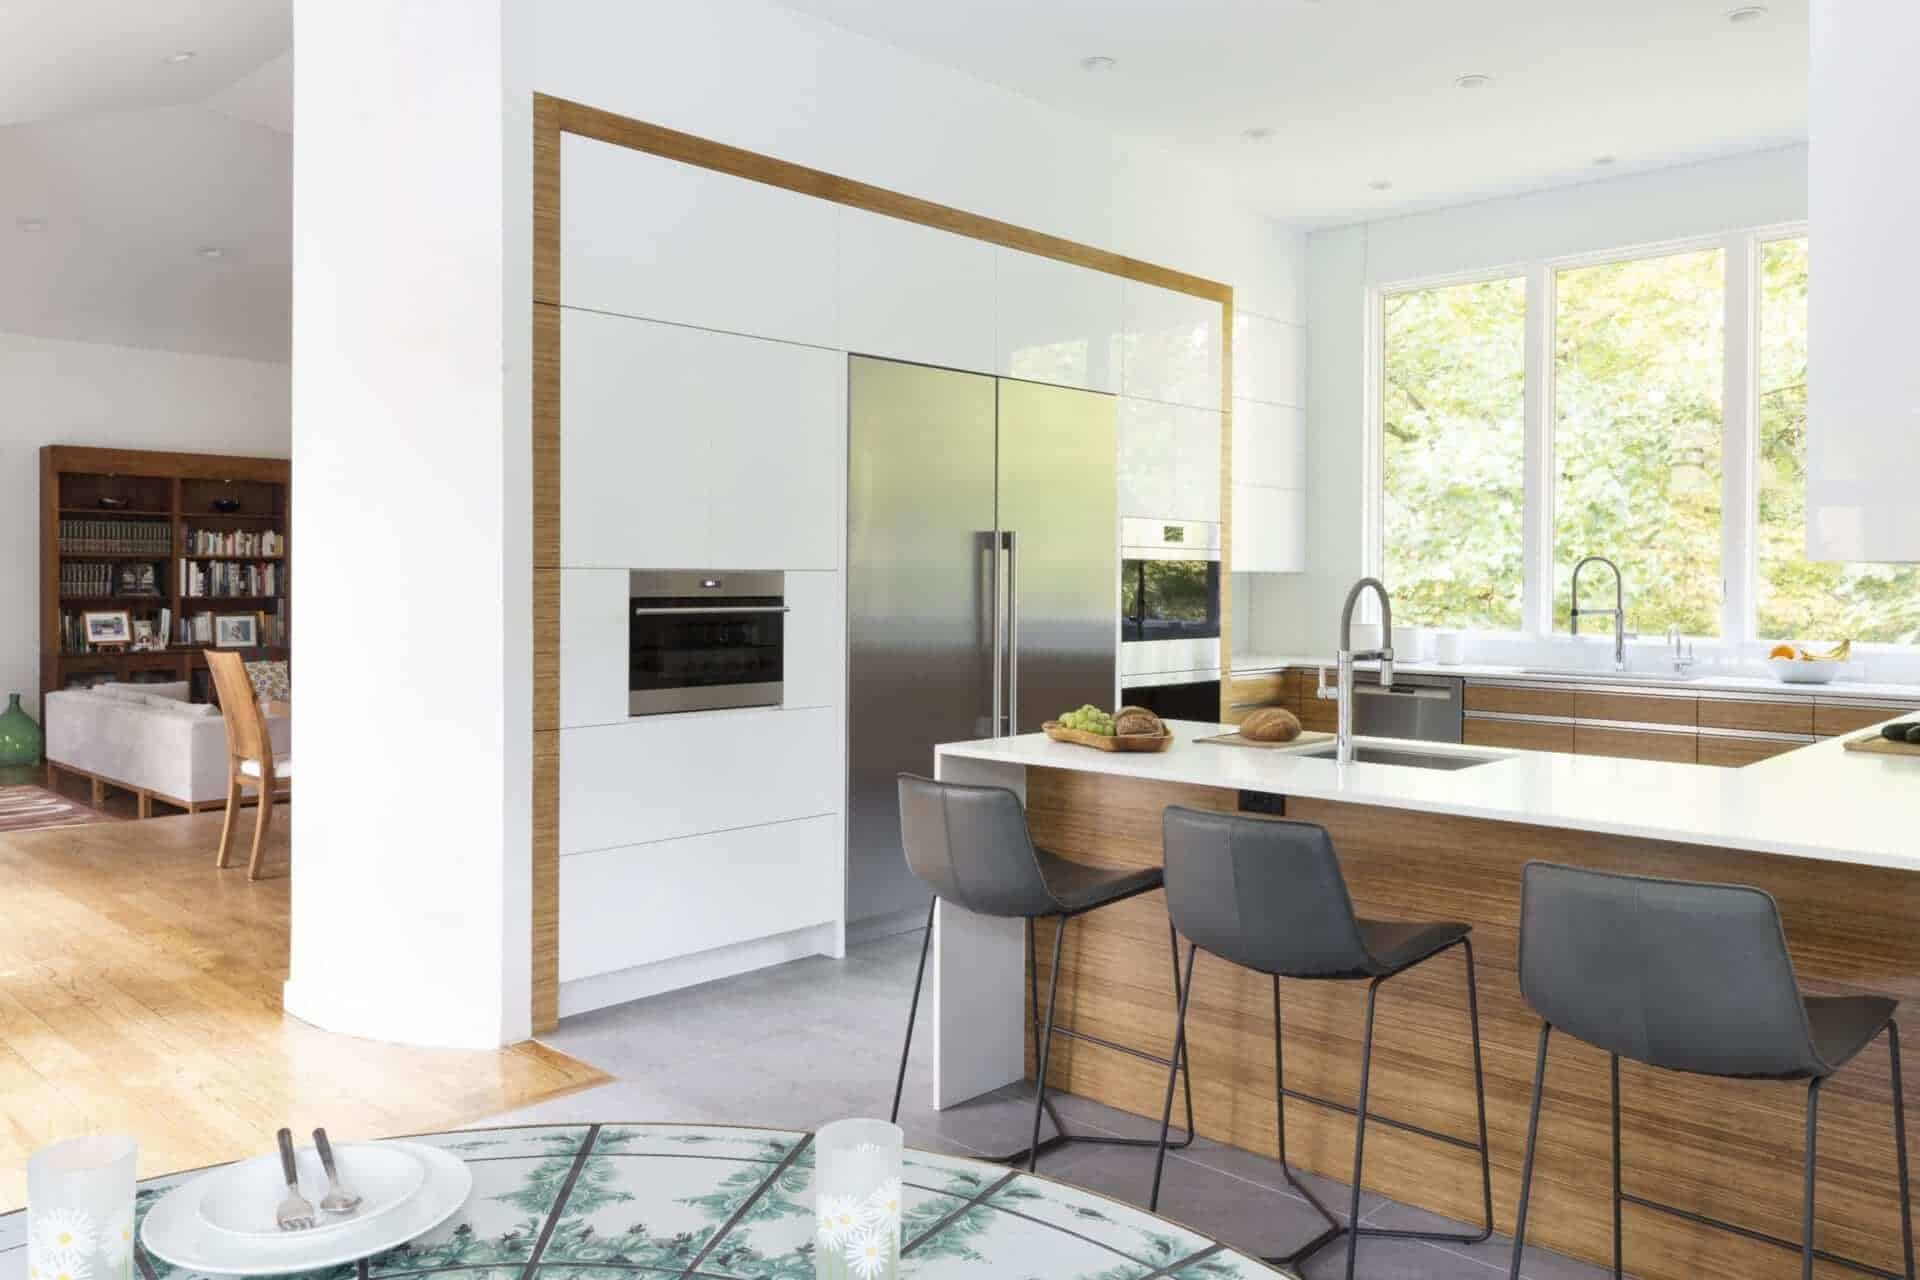 Modern kitchen mixes white and bamboo. NAC cabinetry with stainless hardware. L-shaped island has Caesarstone waterfall countertop.